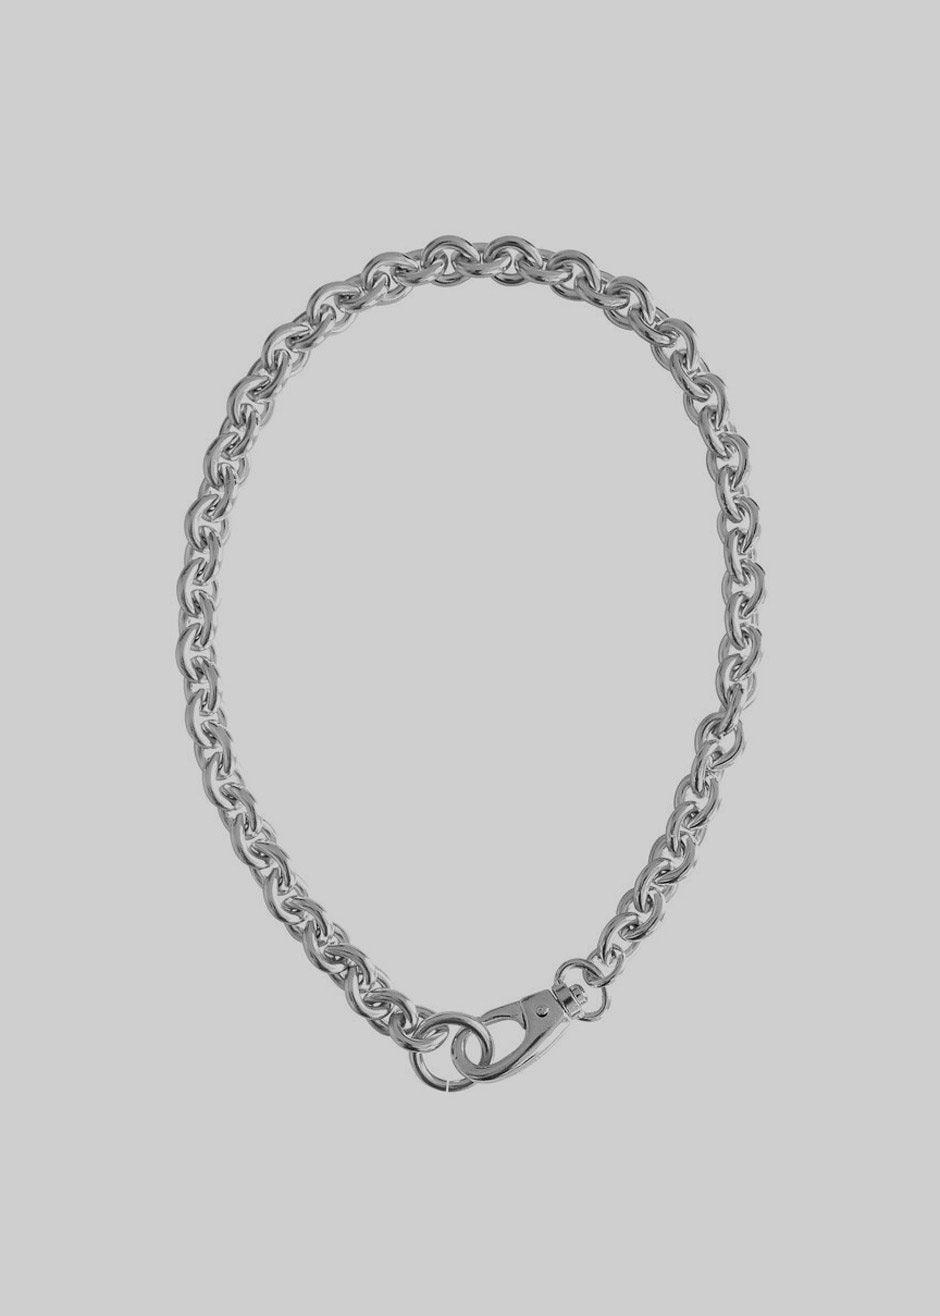 Completedworks Fee-Fi-Fo-Fum Necklace - Recycled Silver – The Frankie Shop